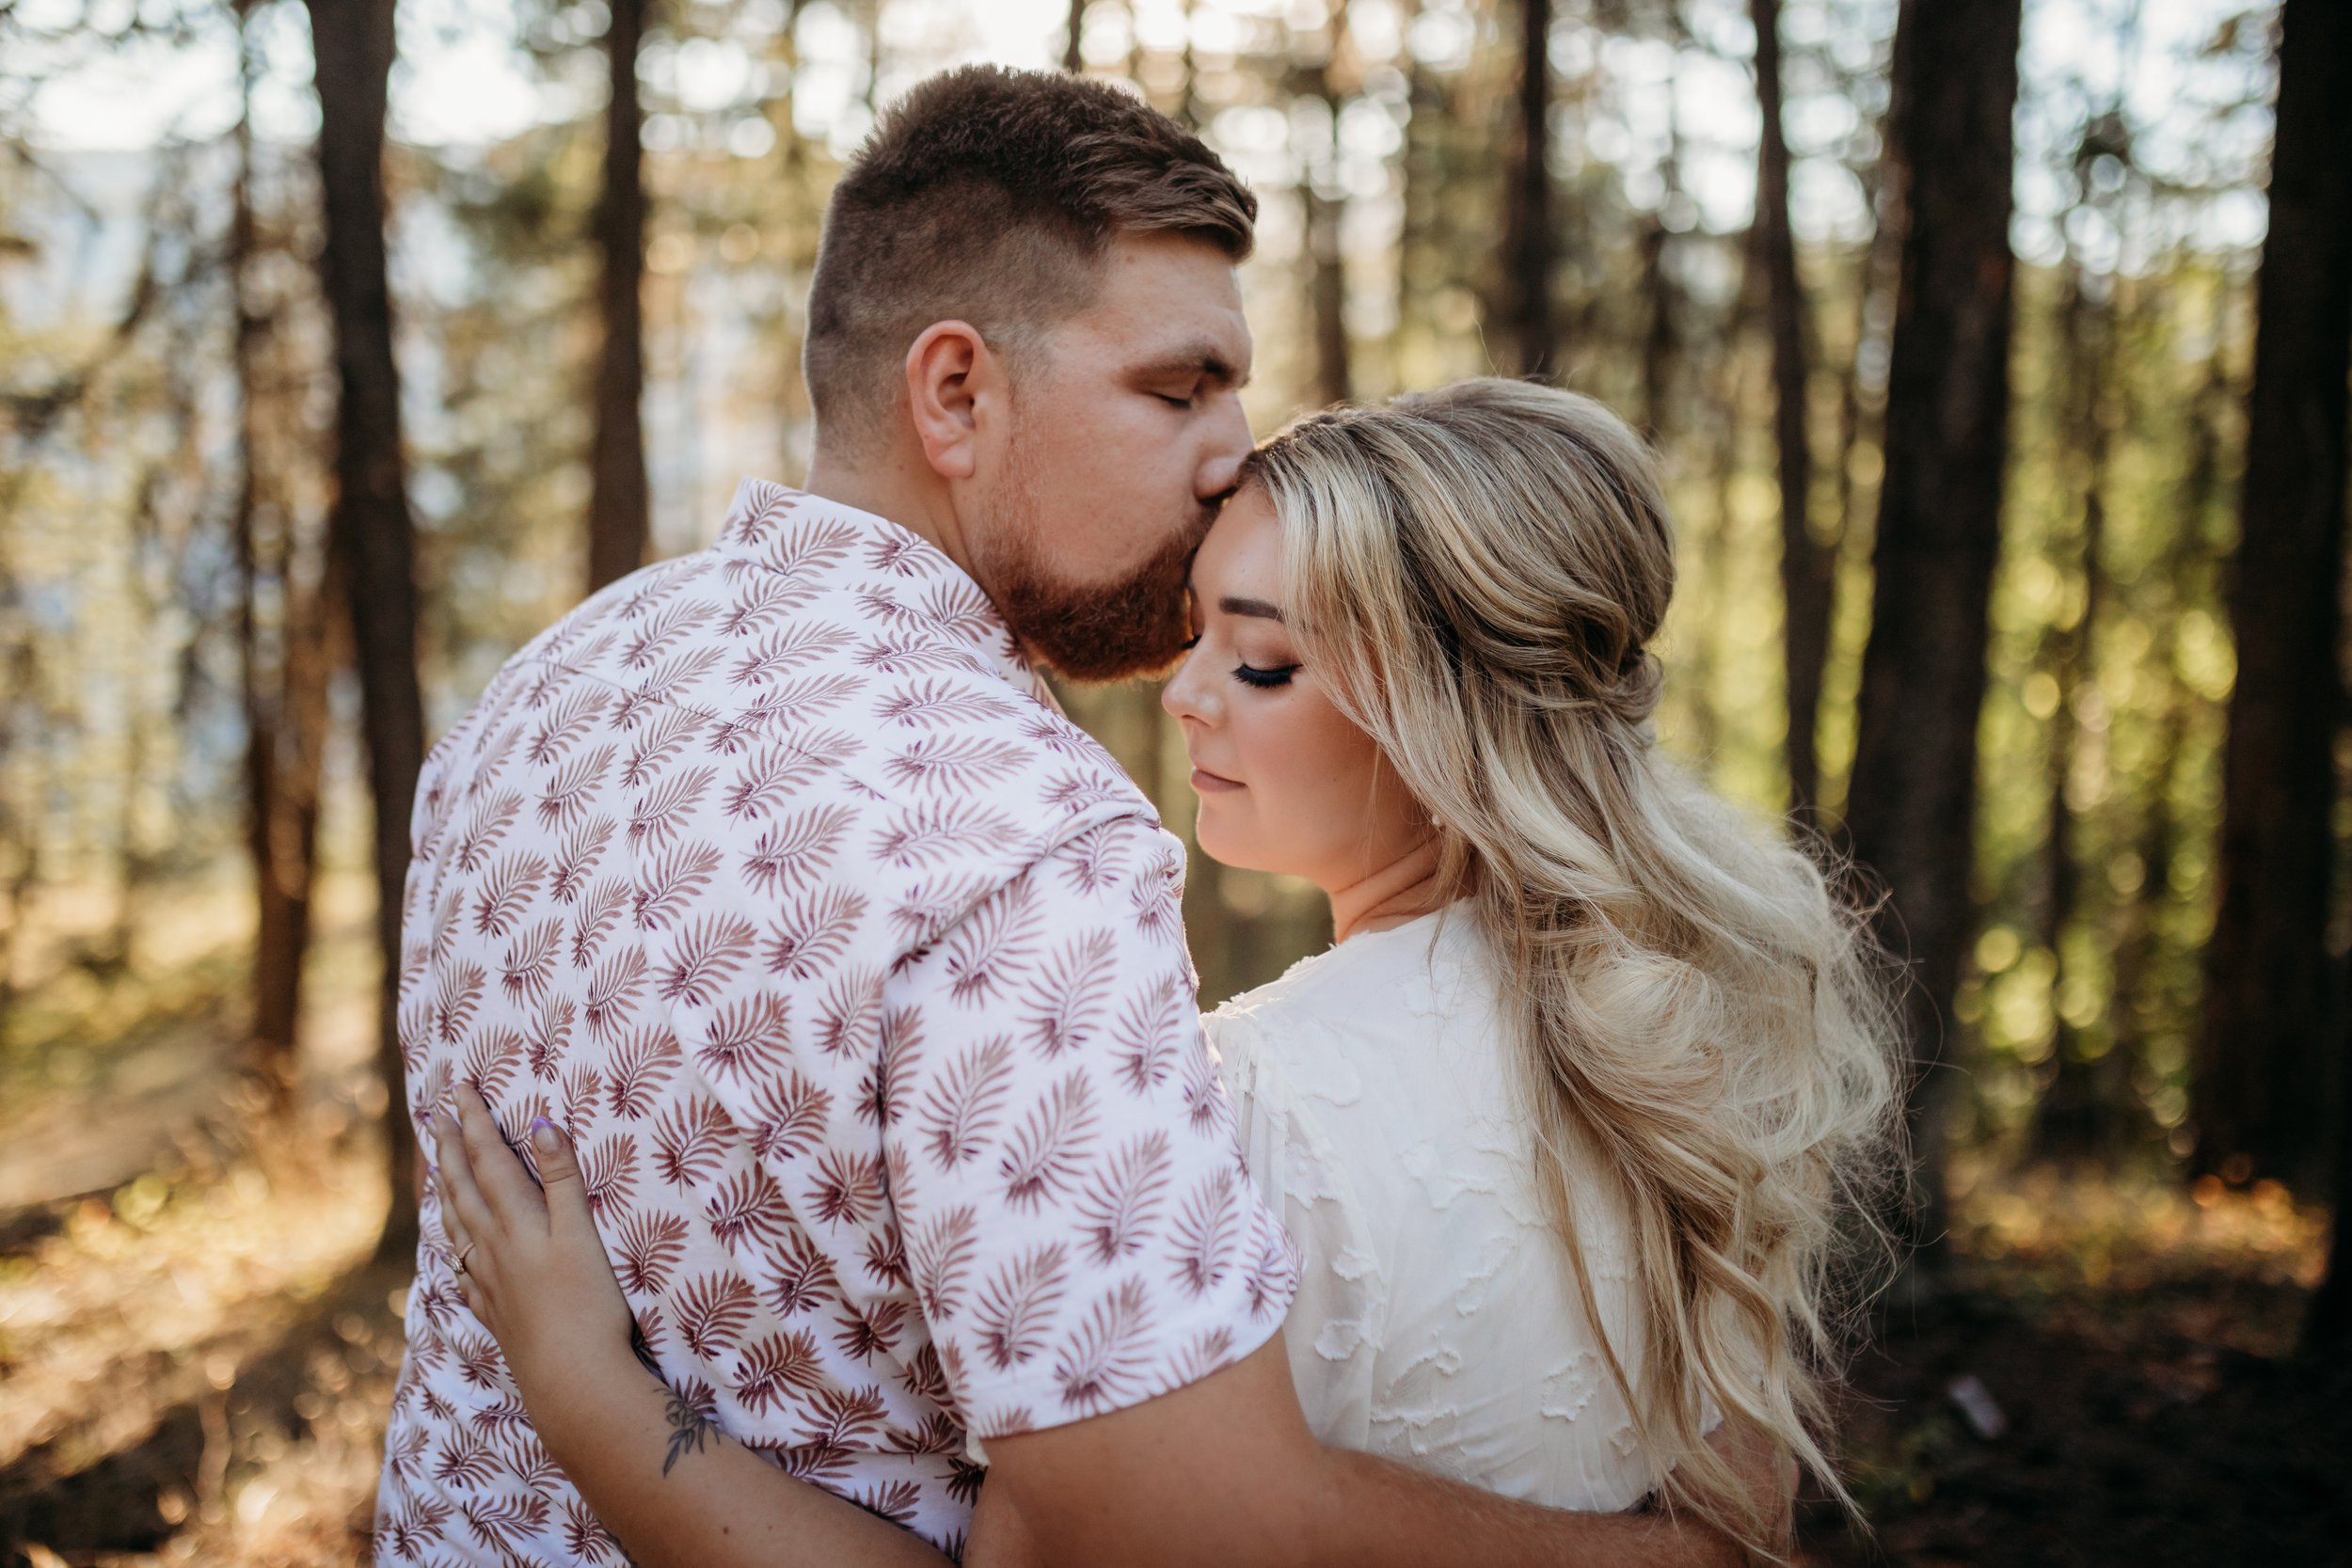 MomentsbyCailey-CassidyEthan-EngagementSession-18.jpg